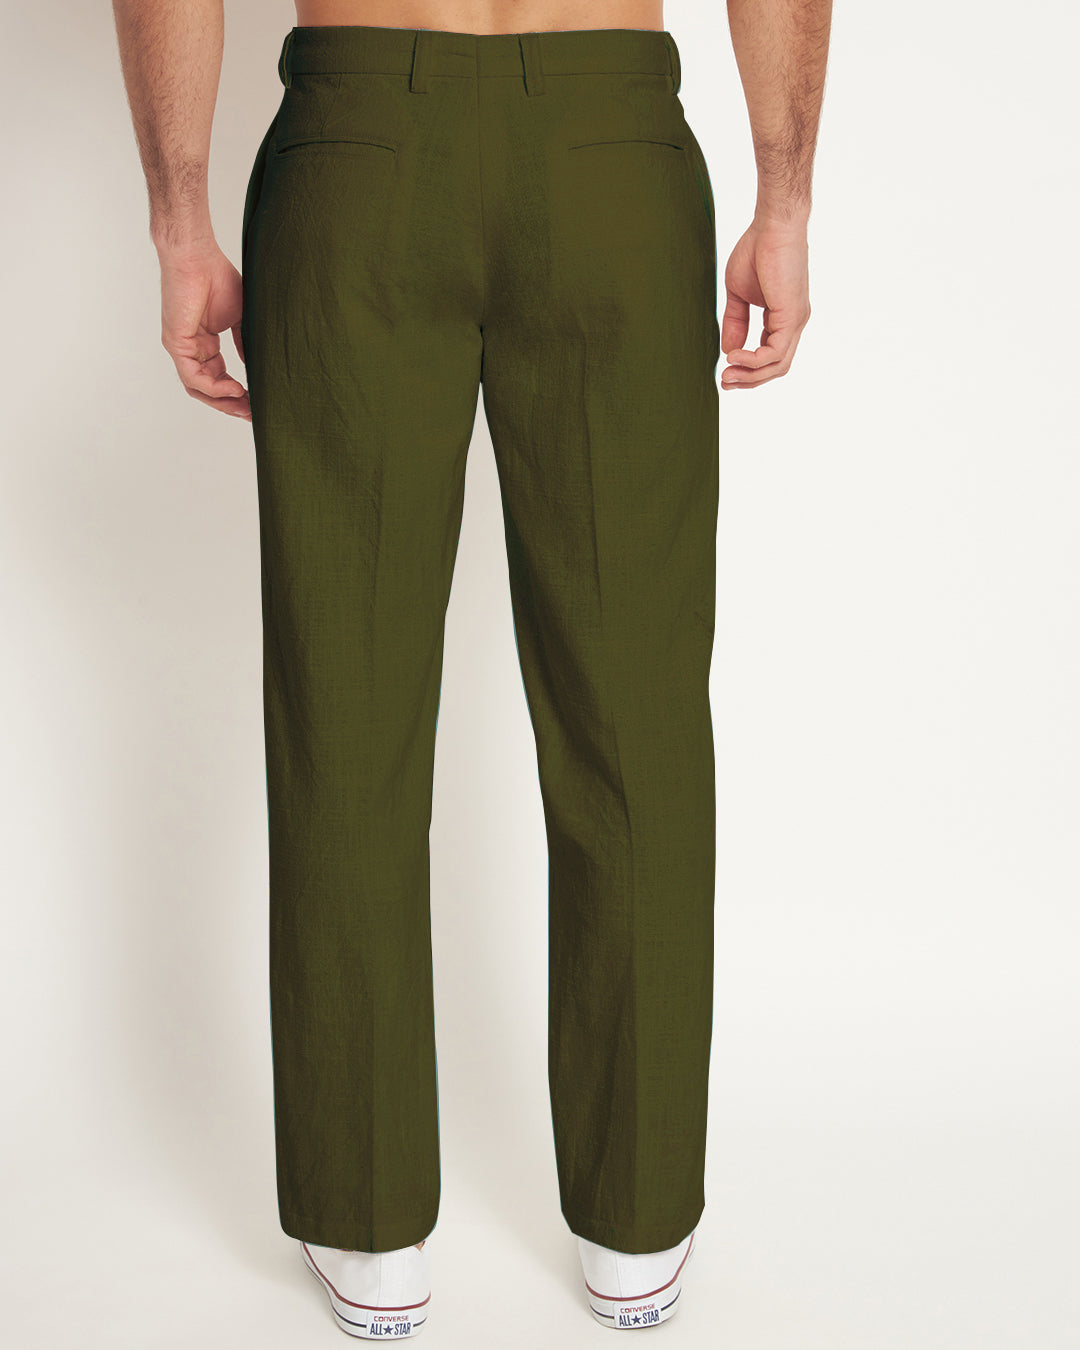 Casual Ease Olive Green Men's Pants